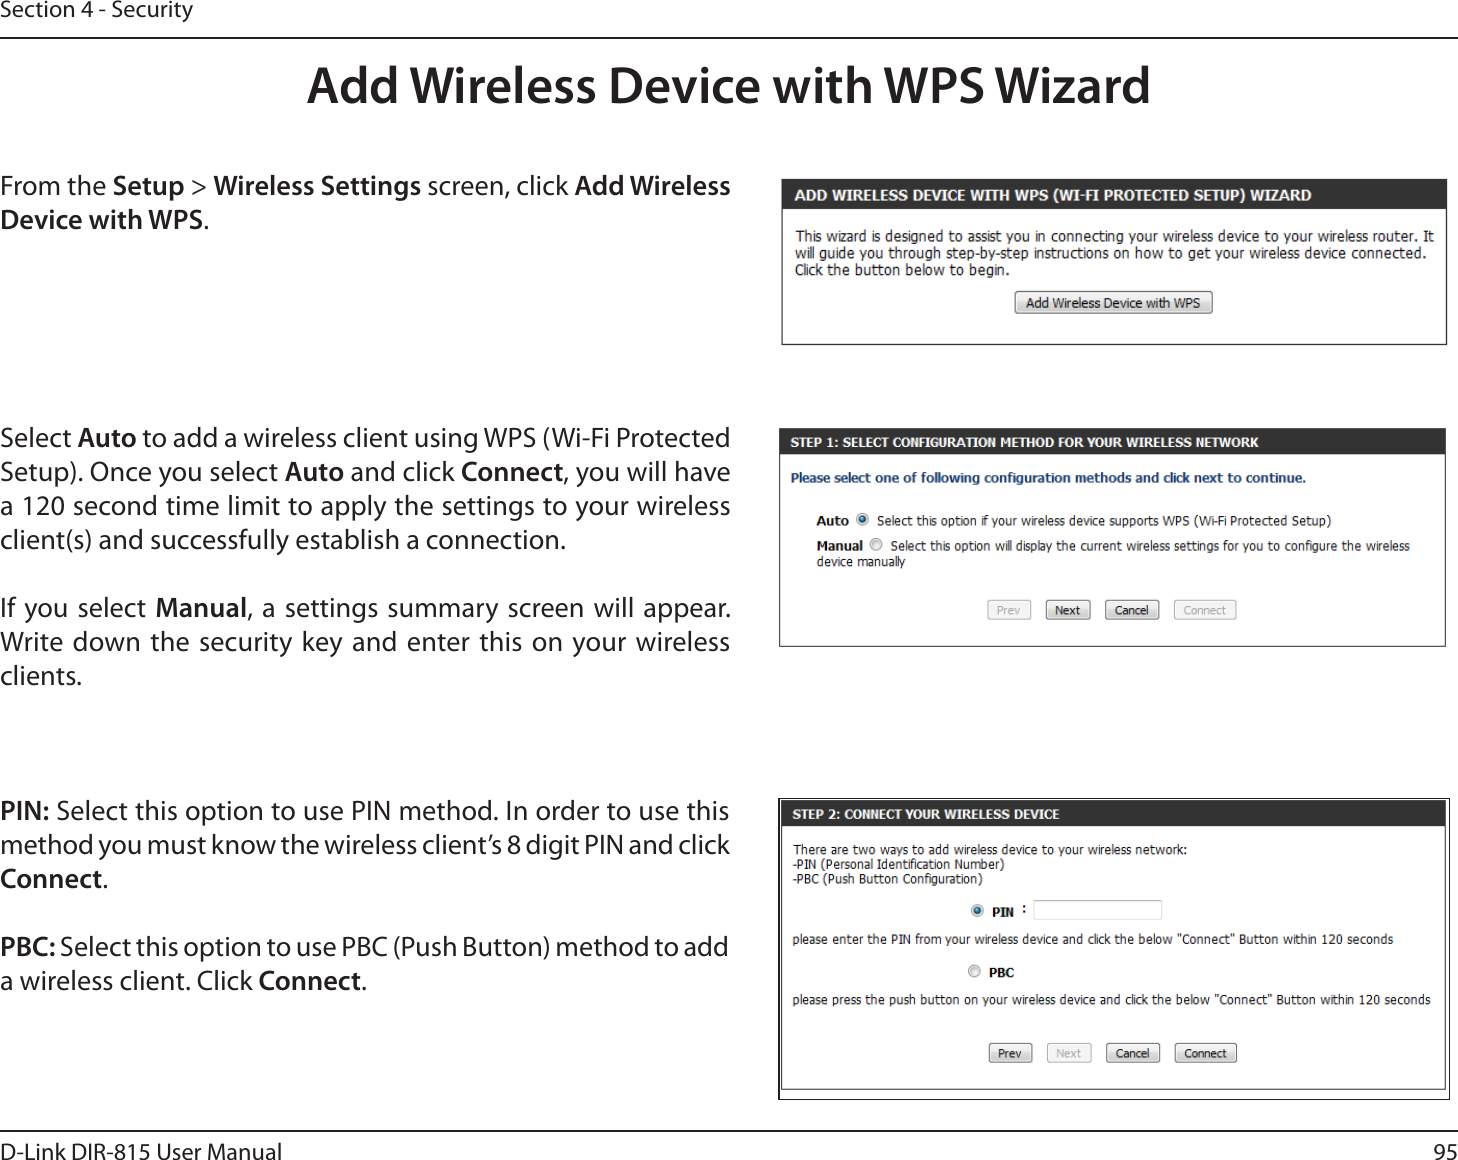 95D-Link DIR-815 User ManualSection 4 - SecurityFrom the Setup &gt; Wireless Settings screen, click Add Wireless Device with WPS.Add Wireless Device with WPS WizardPIN: Select this option to use PIN method. In order to use this method you must know the wireless client’s 8 digit PIN and click Connect.PBC: Select this option to use PBC (Push Button) method to add a wireless client. Click Connect.Select Auto to add a wireless client using WPS (Wi-Fi Protected Setup). Once you select Auto and click Connect, you will have a 120 second time limit to apply the settings to your wireless client(s) and successfully establish a connection. If you select Manual, a settings summary screen will appear. Write down the security key and enter this on your wireless clients. 